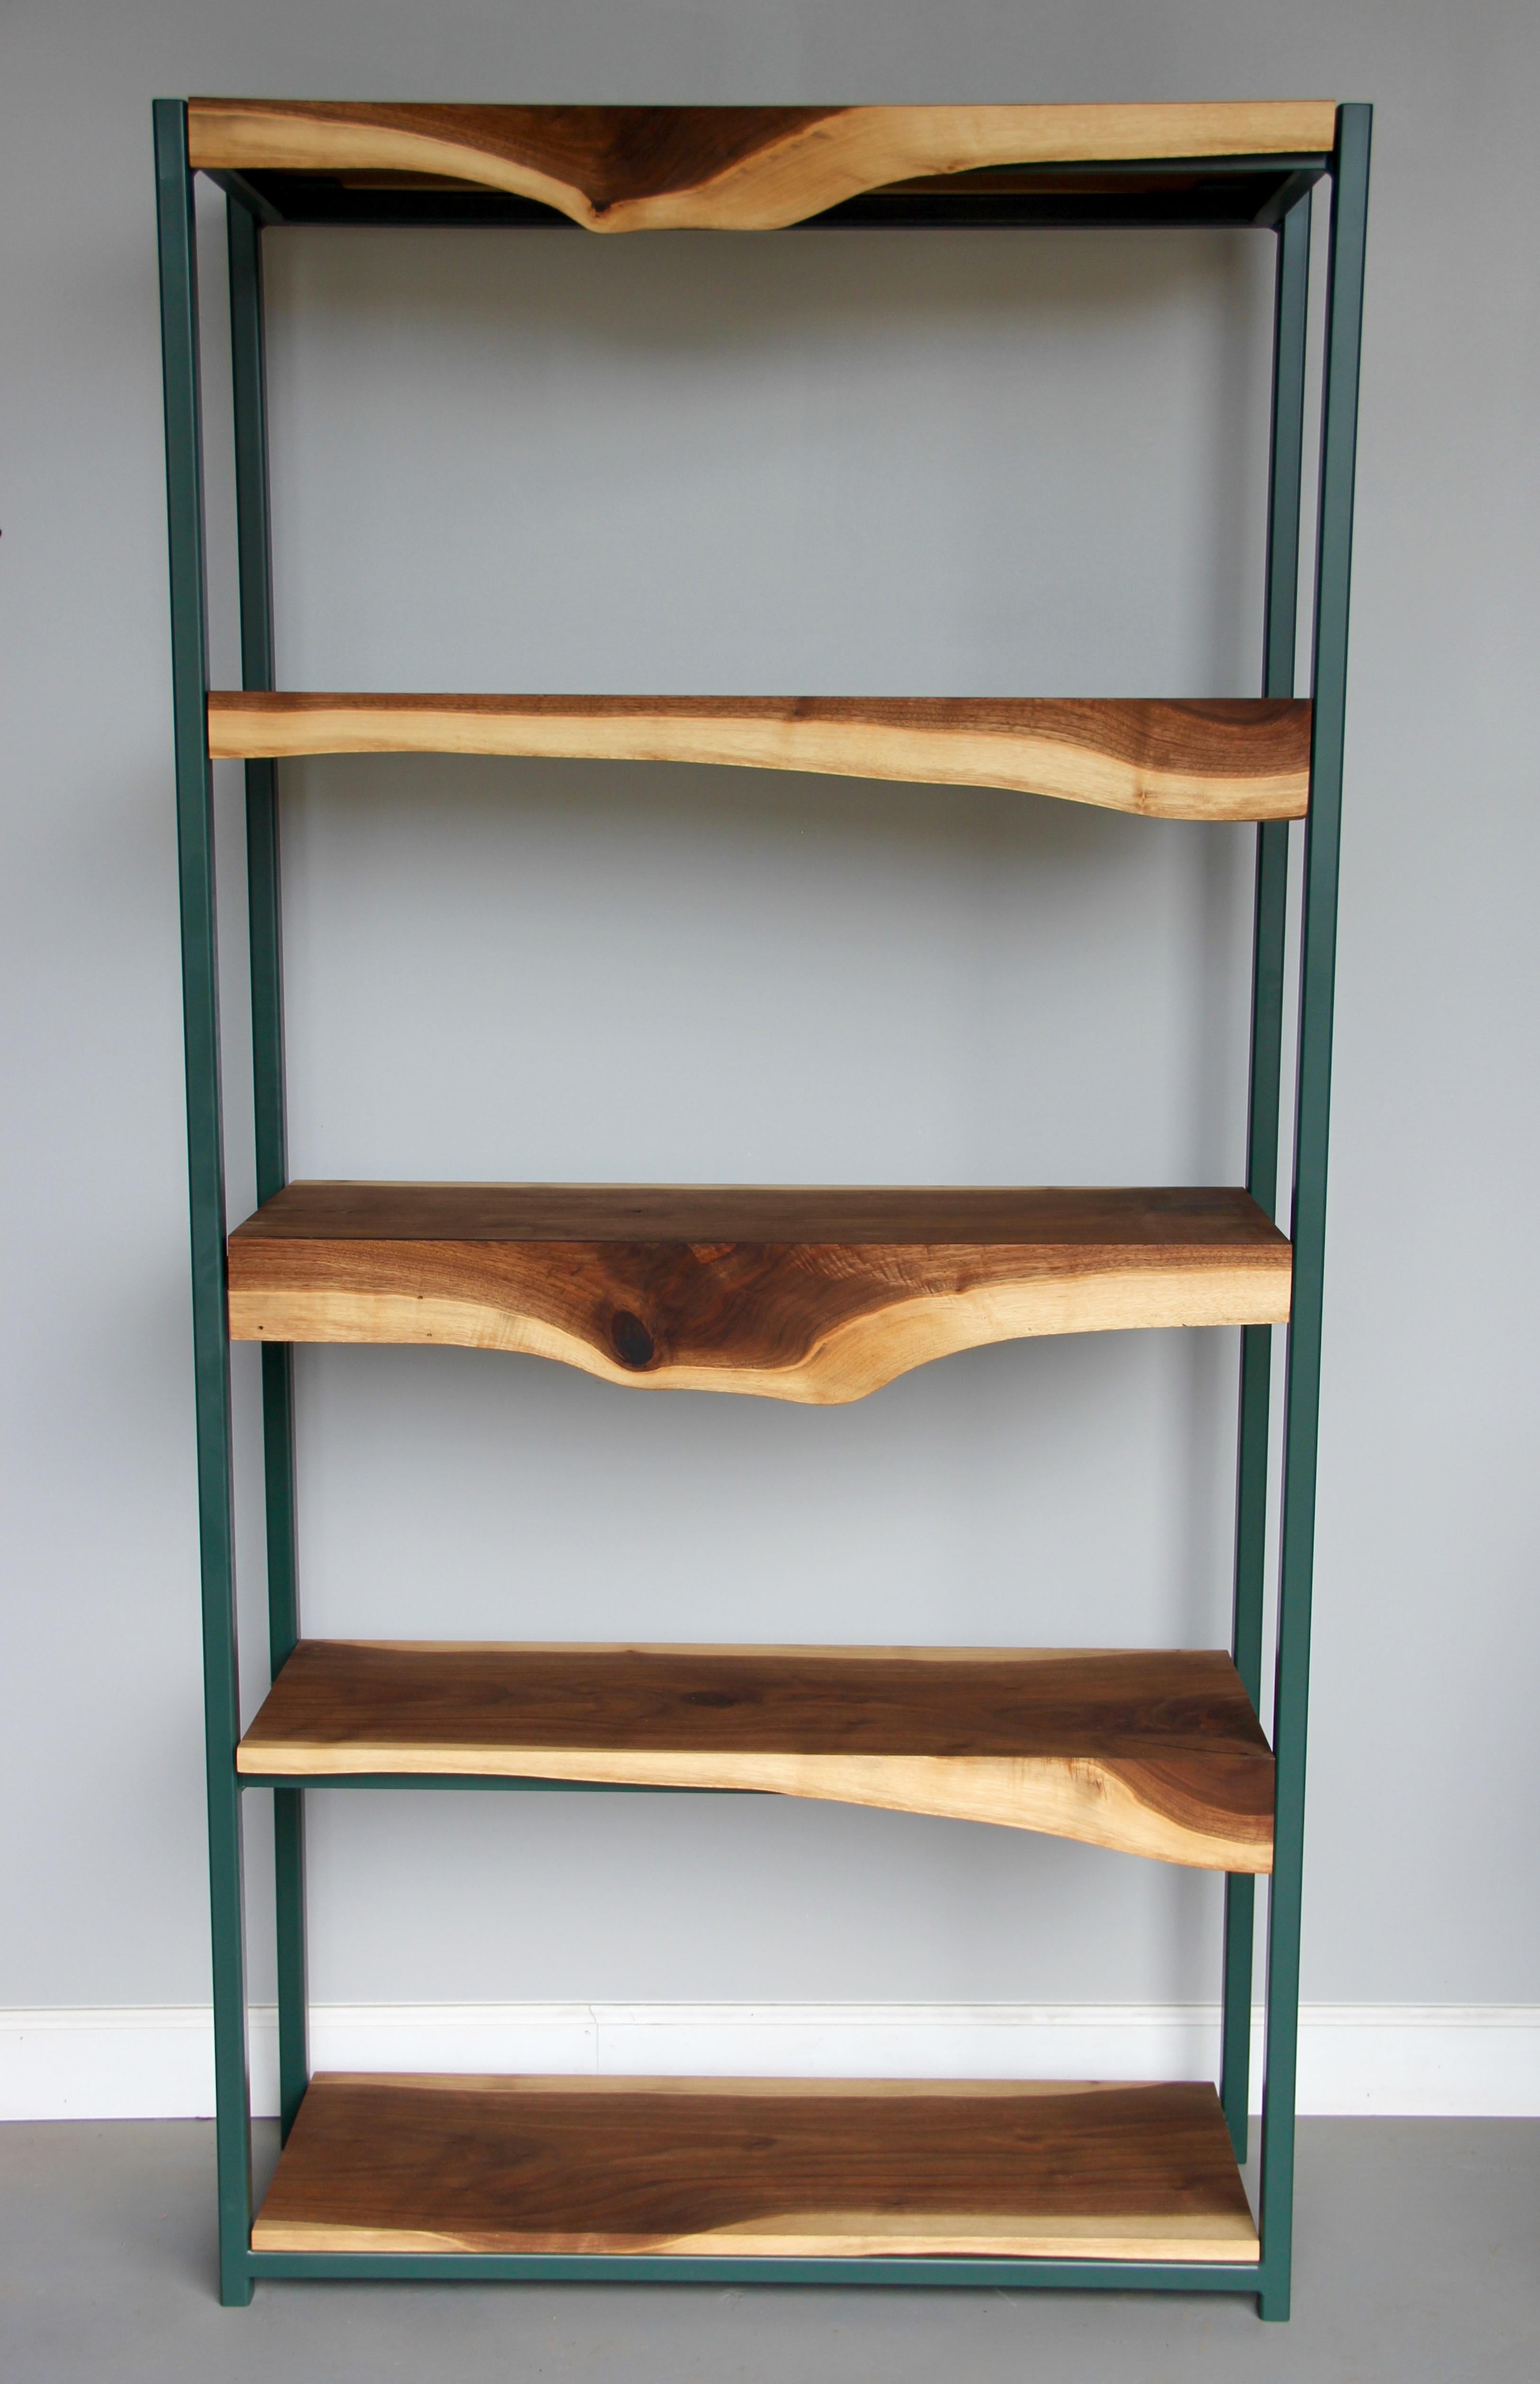 This sleek live edge walnut and steel bookshelf is made by hand in our workshop near Detroit, Michigan. It has a sturdy welded steel frame finished in a deep forest green color, and is paired with handmade walnut live edge slab shelves. One of a